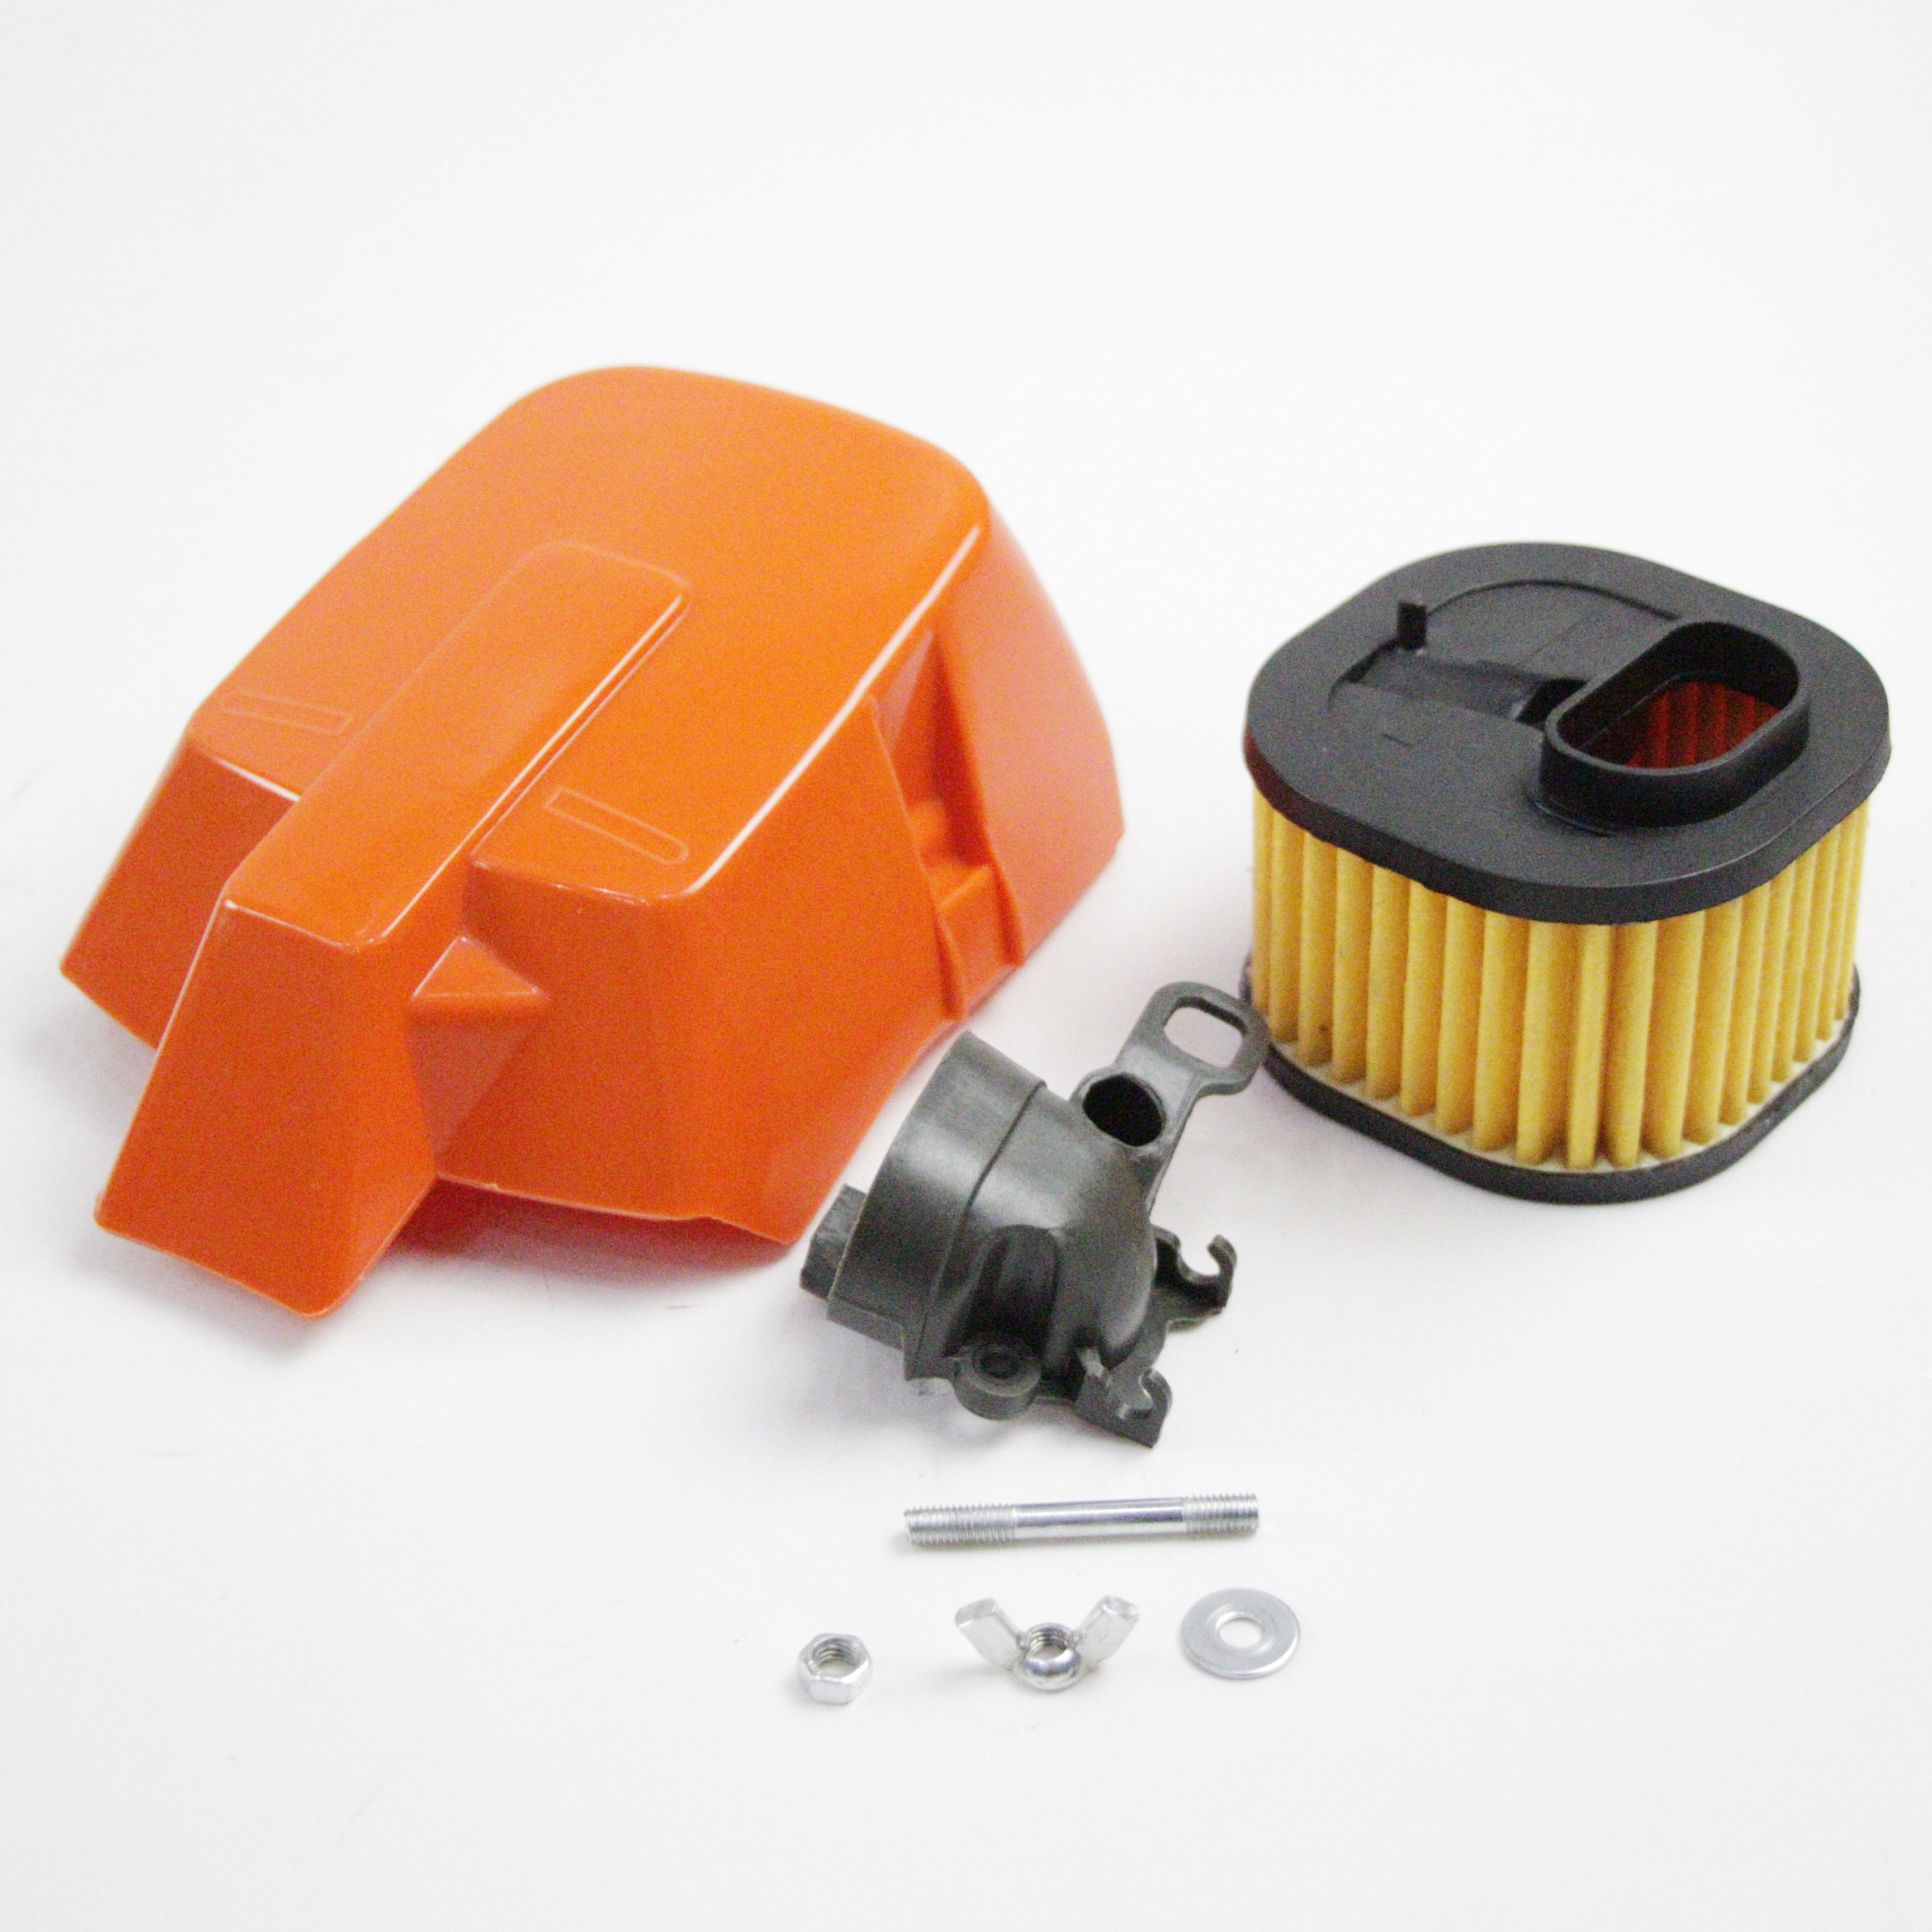 Air Filter Cover Intake Adpator For Husqvarna 362 365 372 372 XP Chainsaw